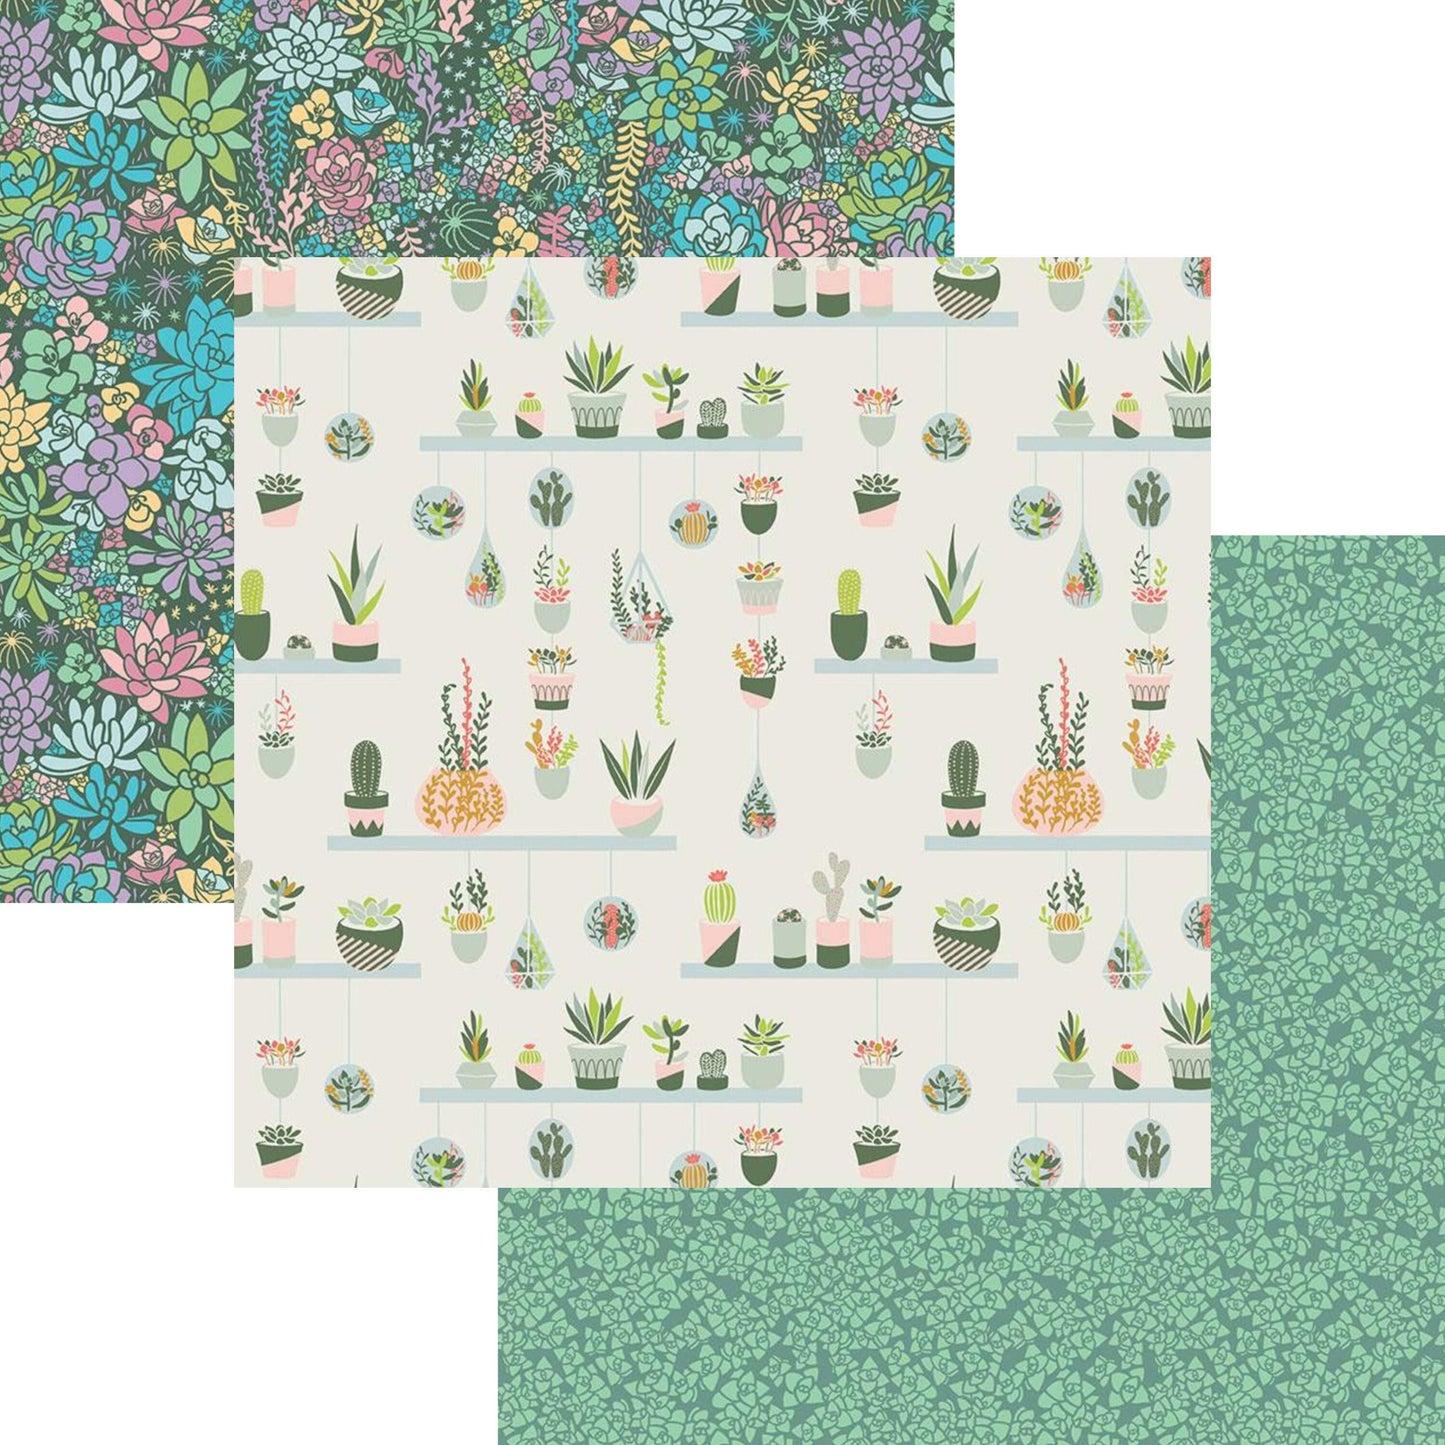 LAMINATED cotton fabric - Succulent-Arid Oasis tone on tone (sold continuous by the half yard) Food Safe Fabric, BPA free